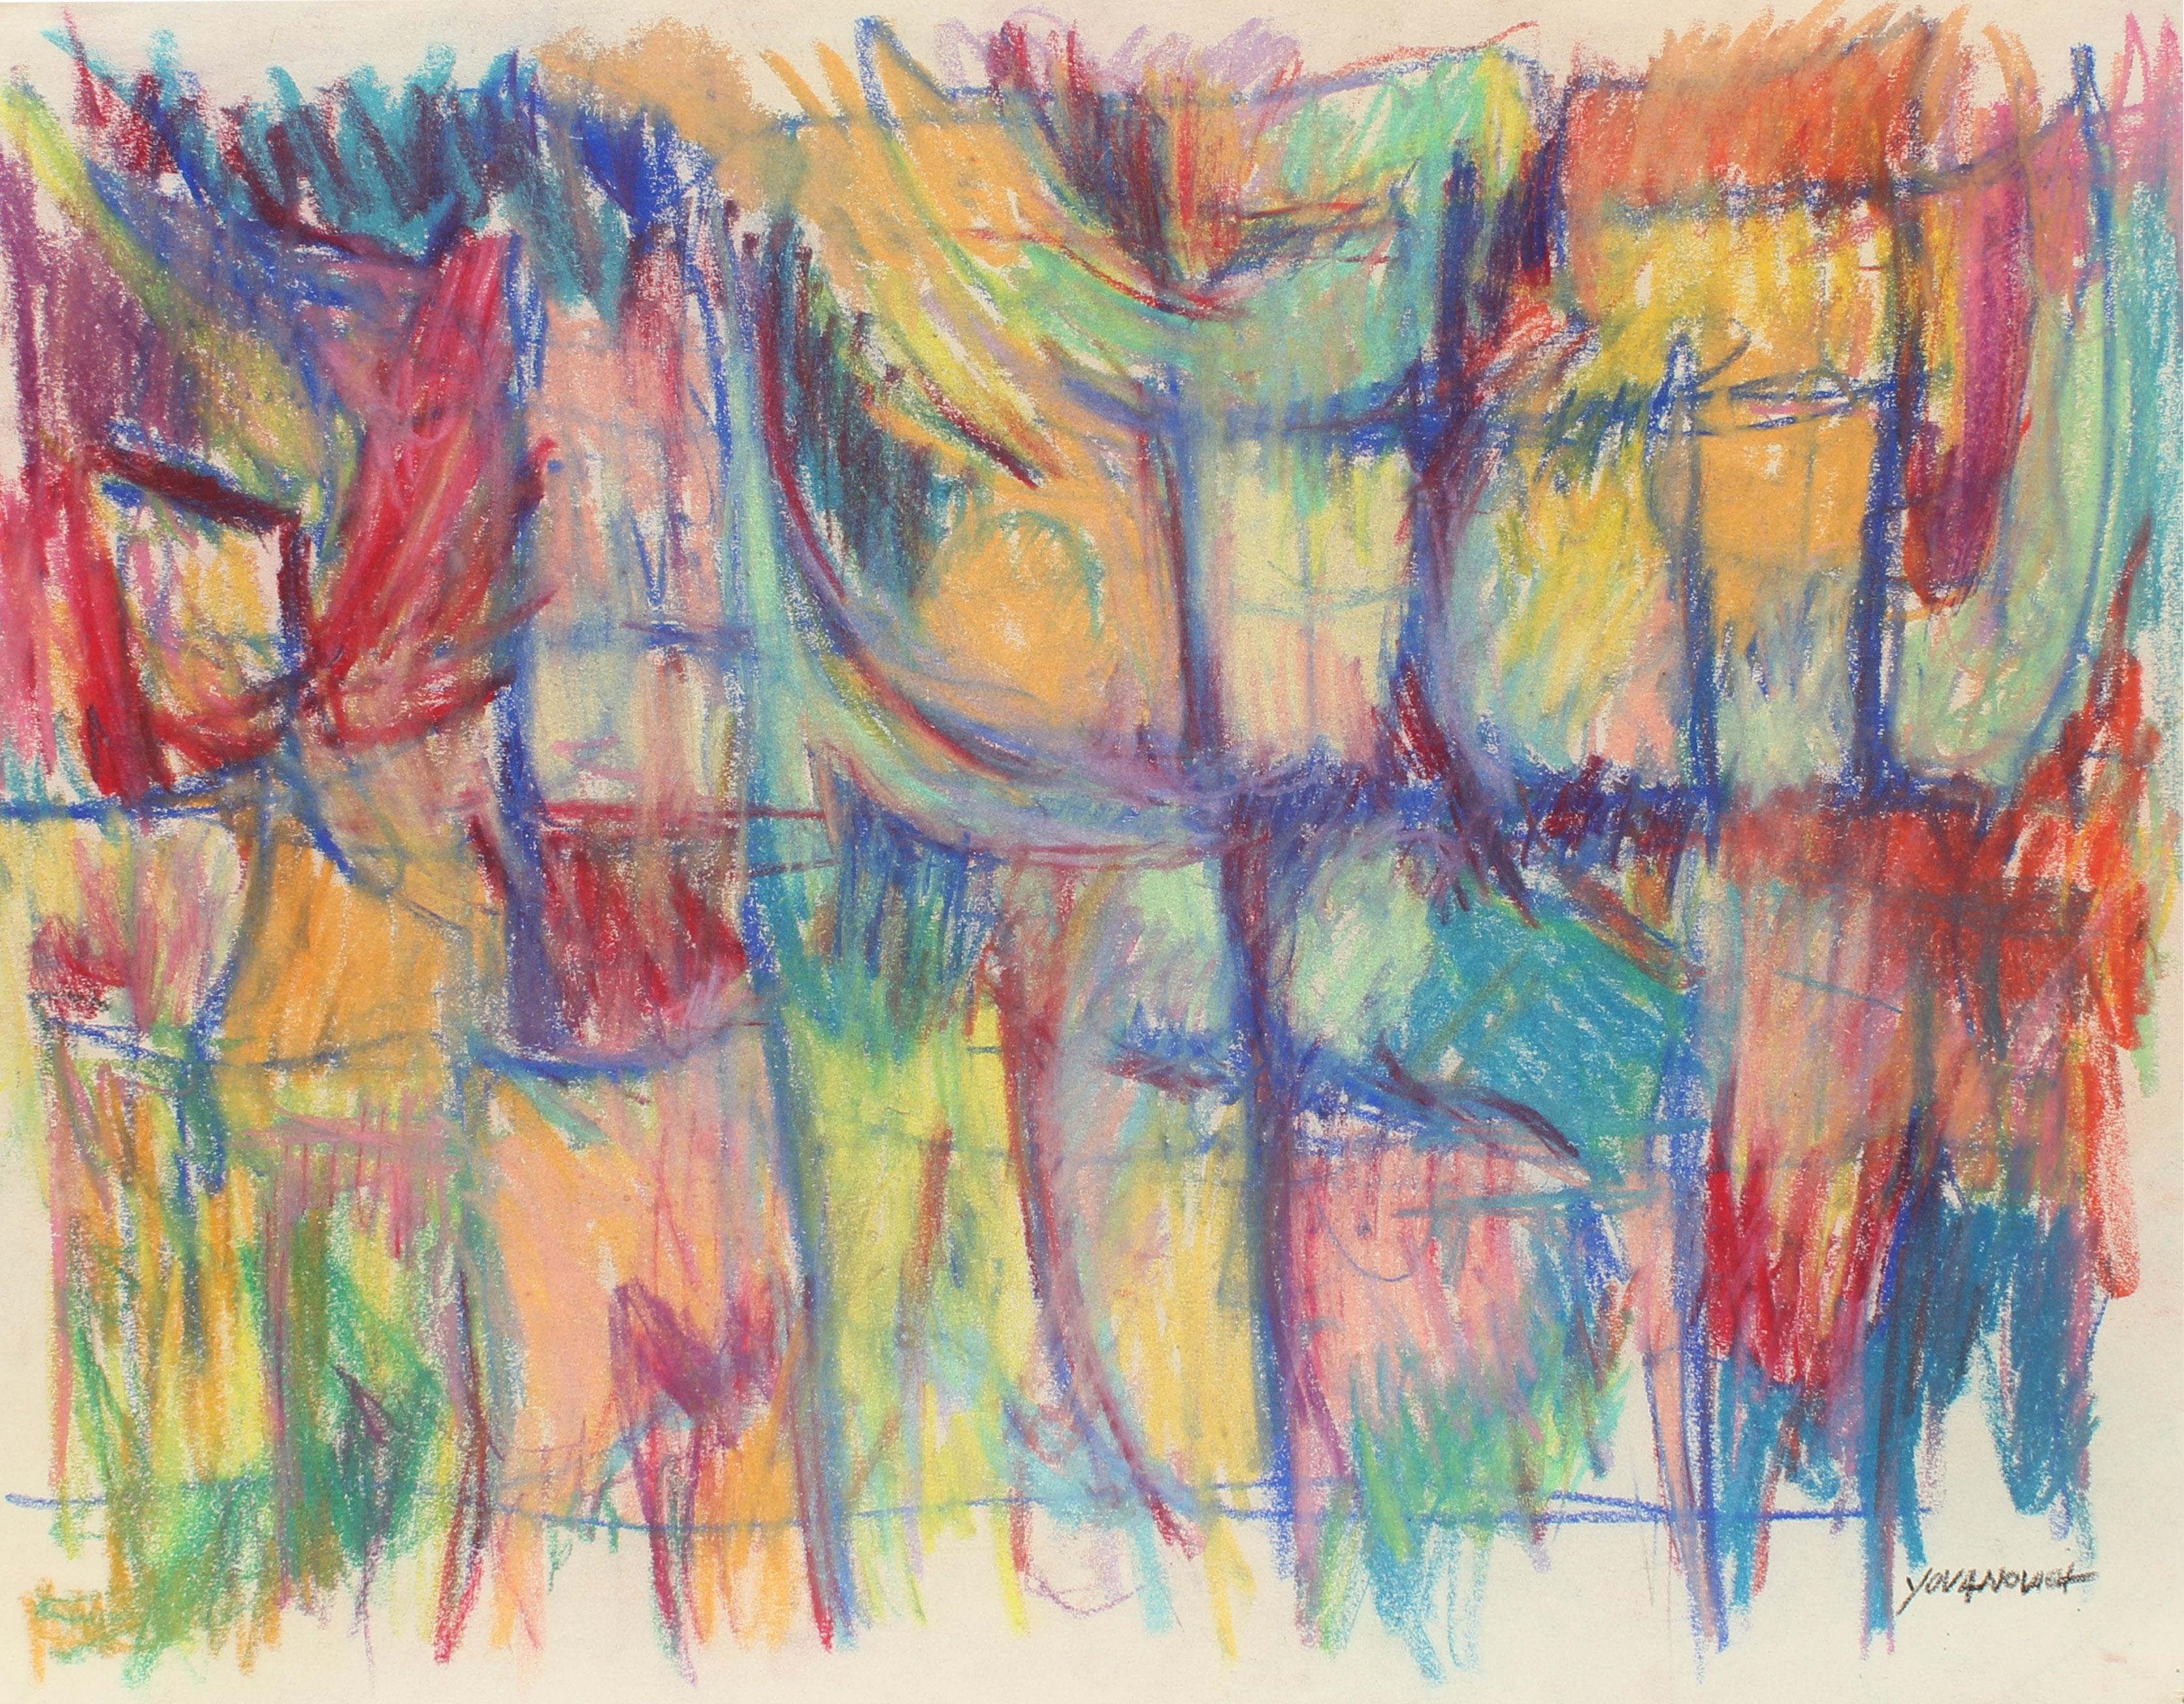 Mid-Century Modern abstract oil pastel drawing by American artist Toma Tovanovich (1931- 2016).   

The paper size is 17